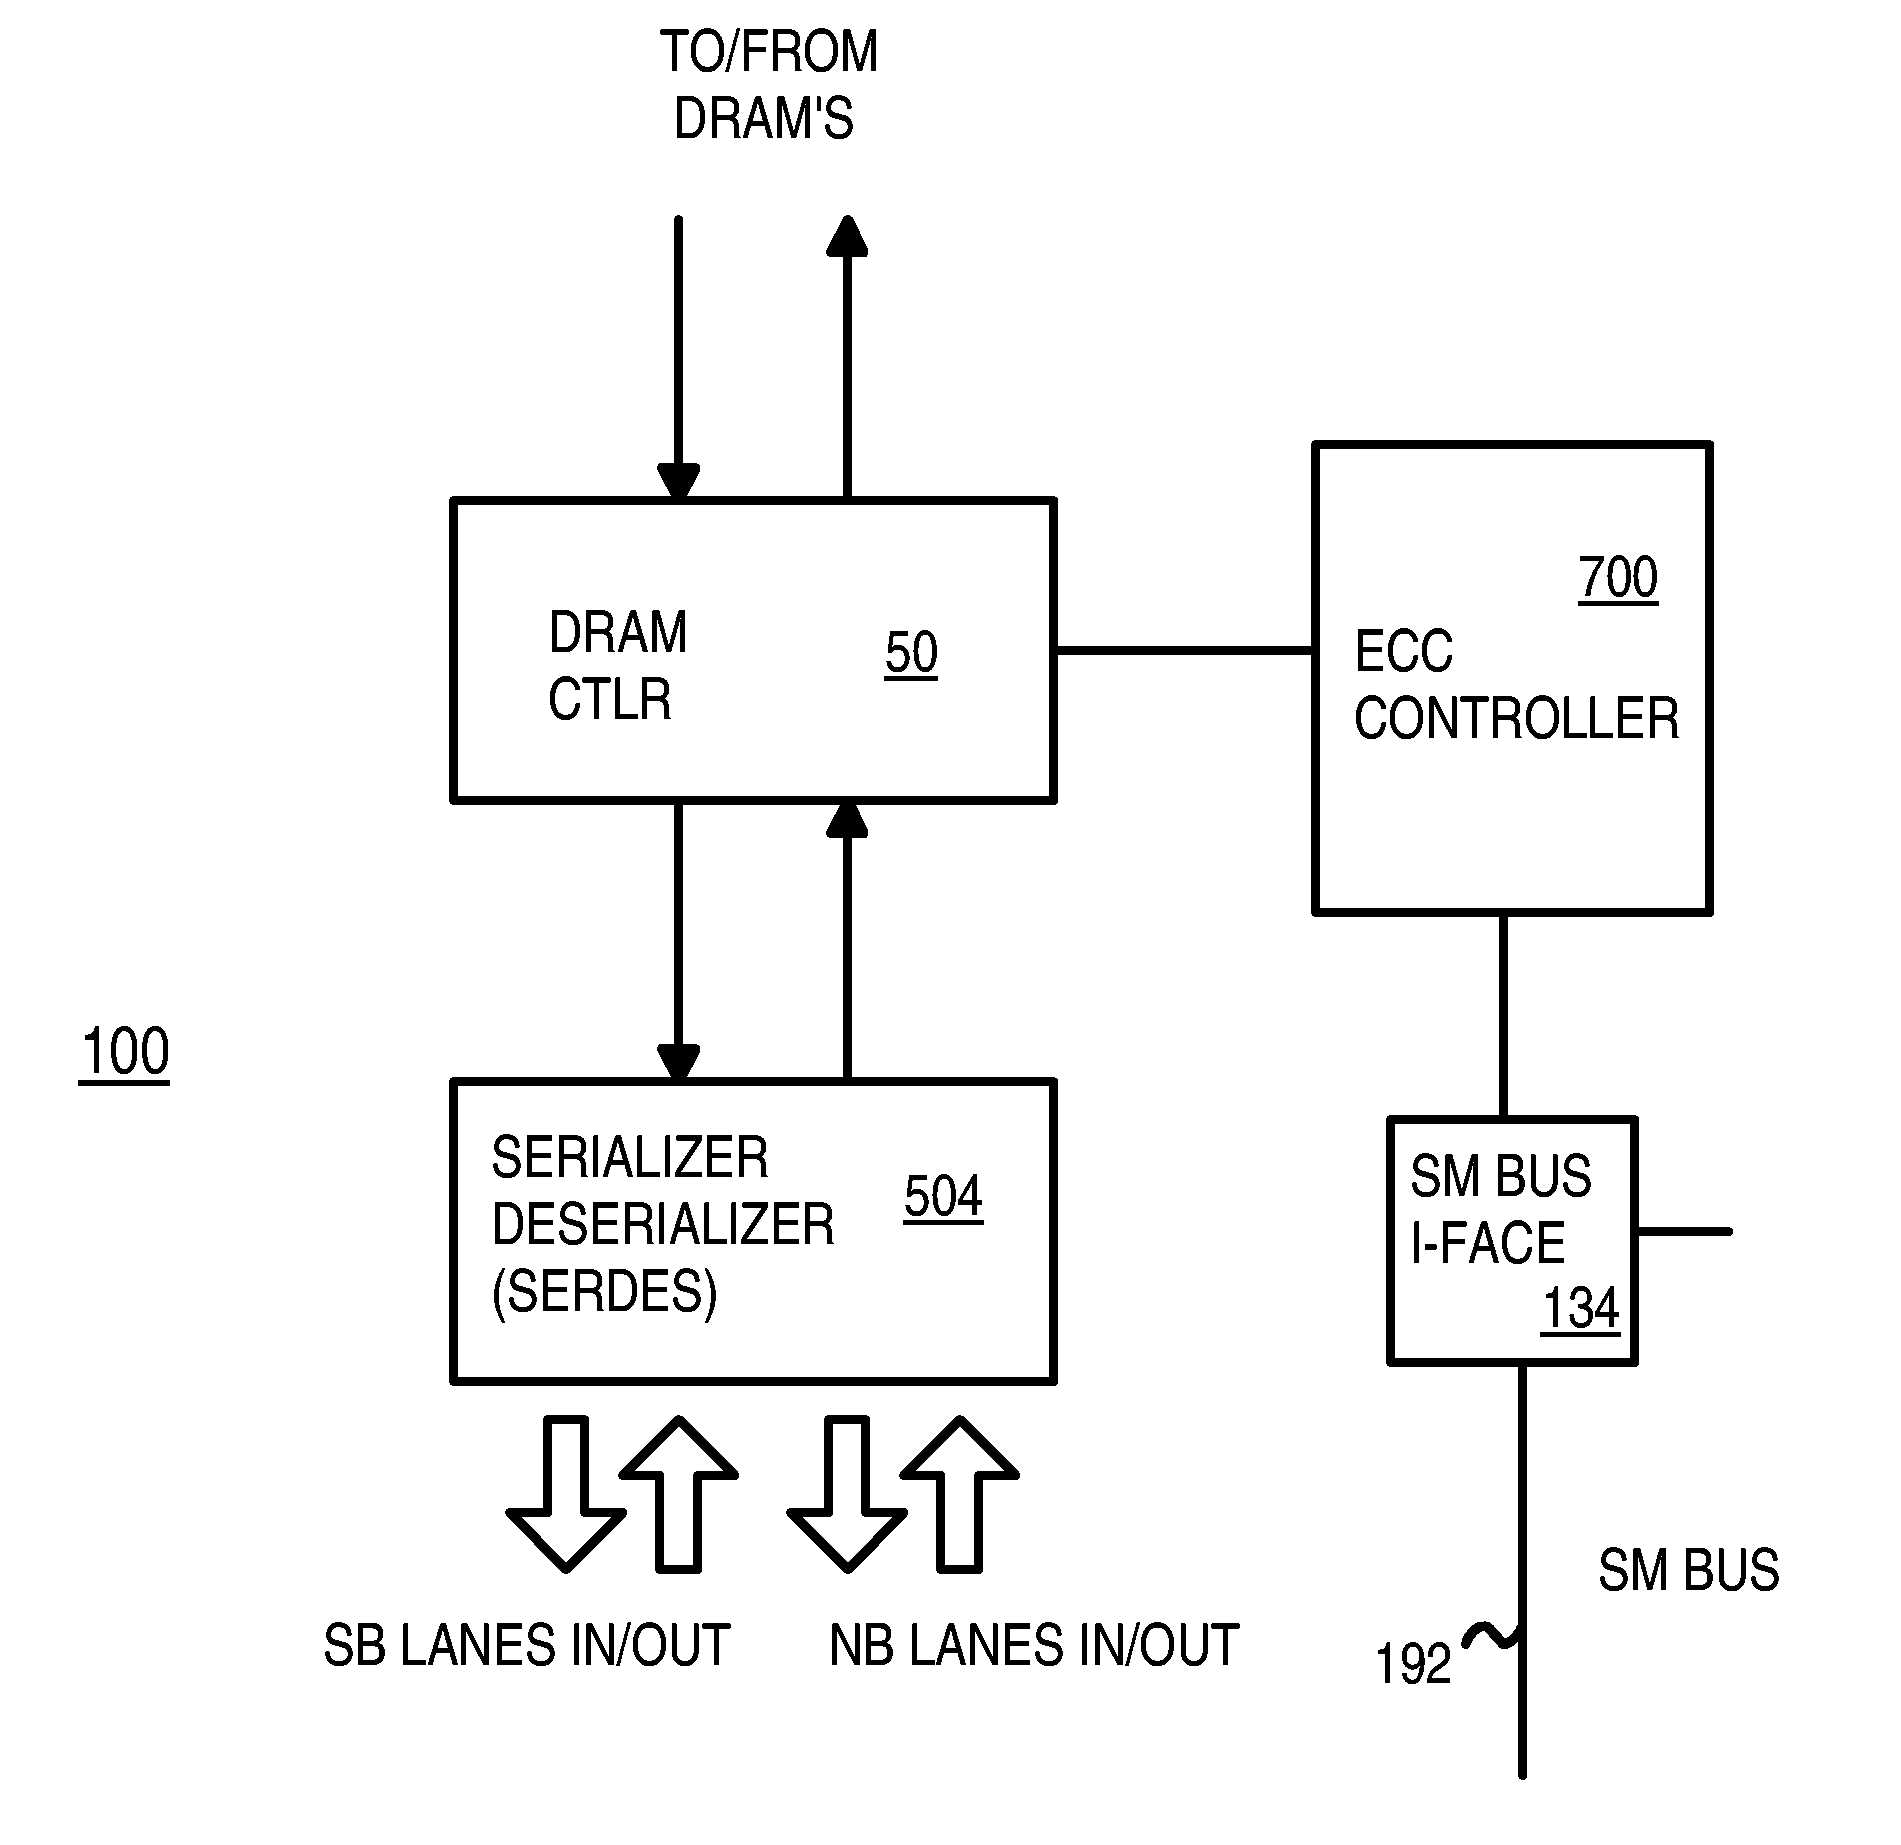 Fully-buffered memory-module with error-correction code (ECC) controller in serializing advanced-memory buffer (AMB) that is transparent to motherboard memory controller